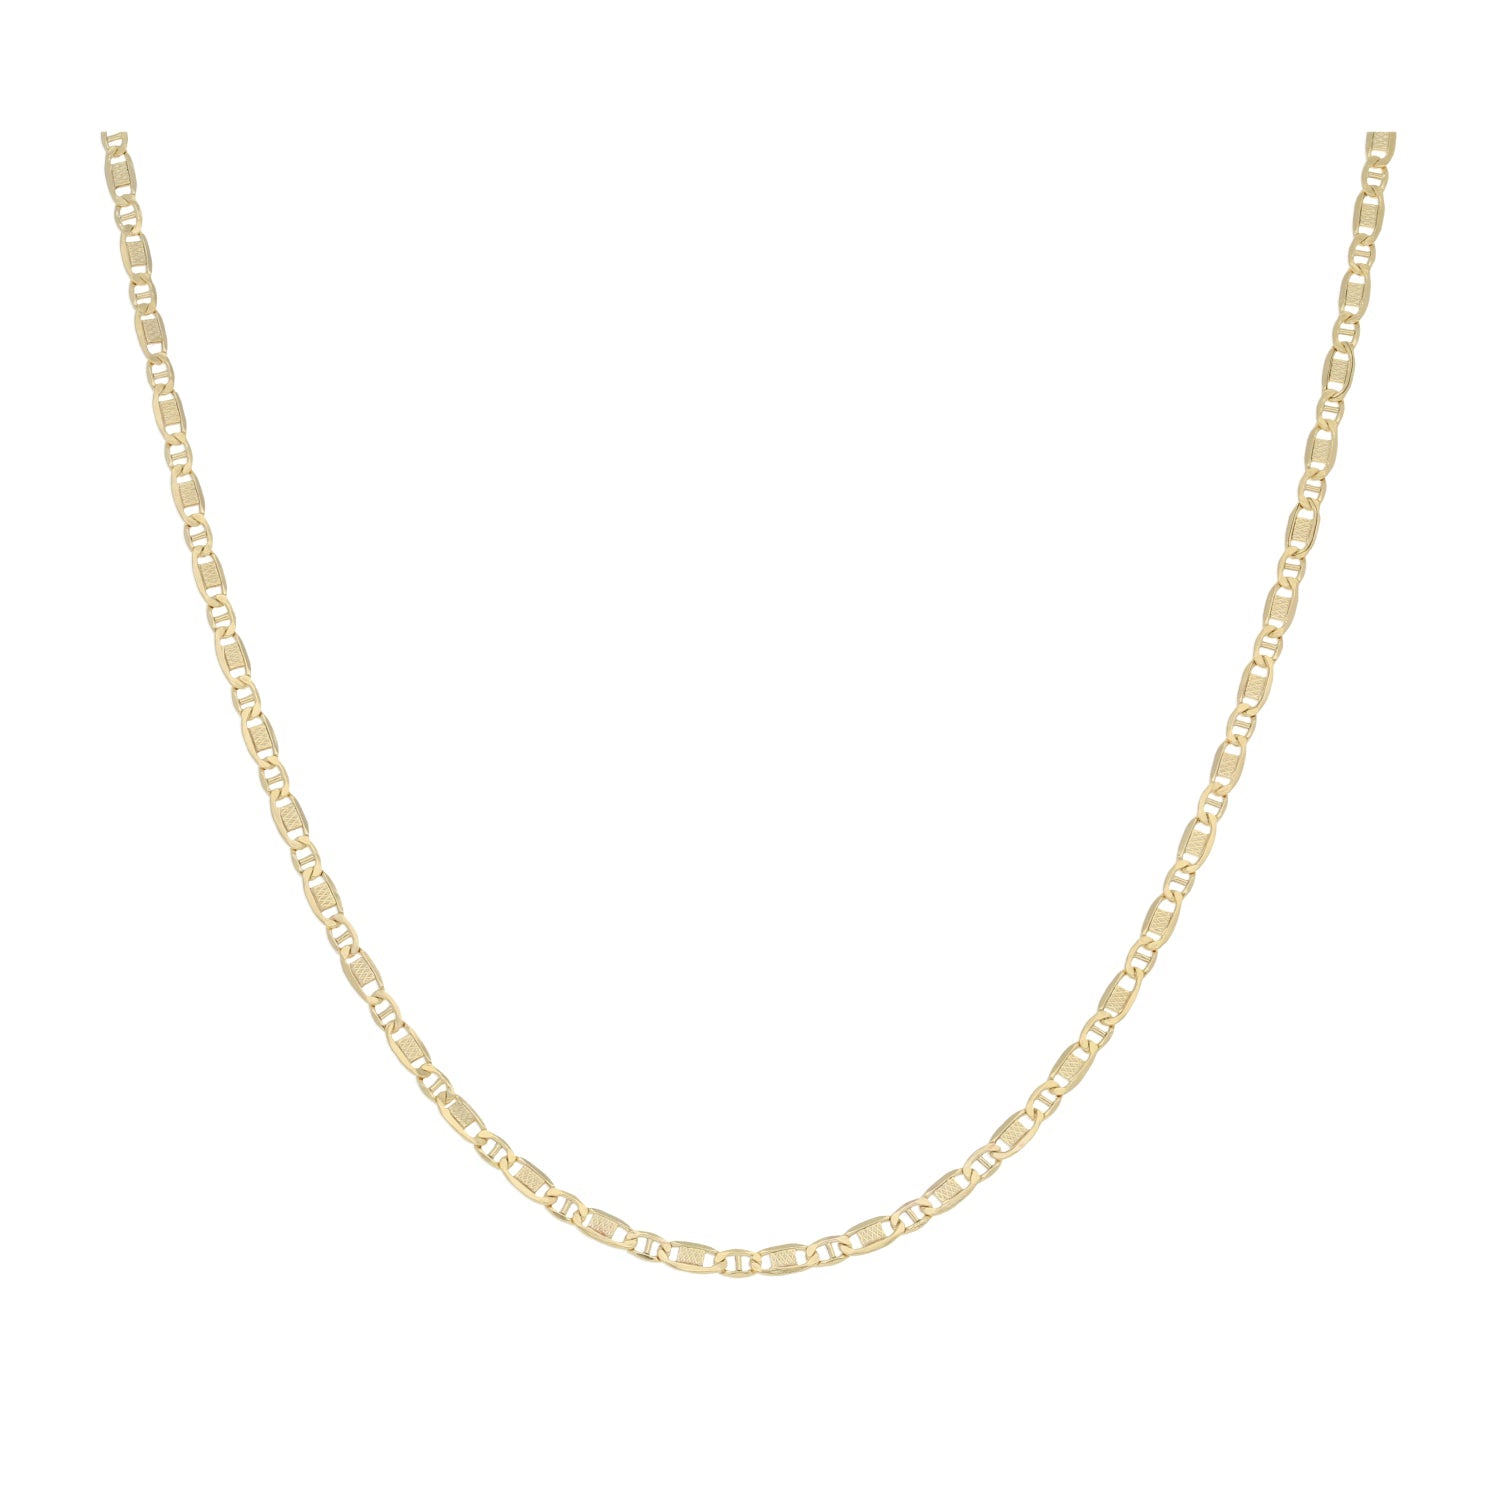 14ct Gold Fancy Link Necklace 18"